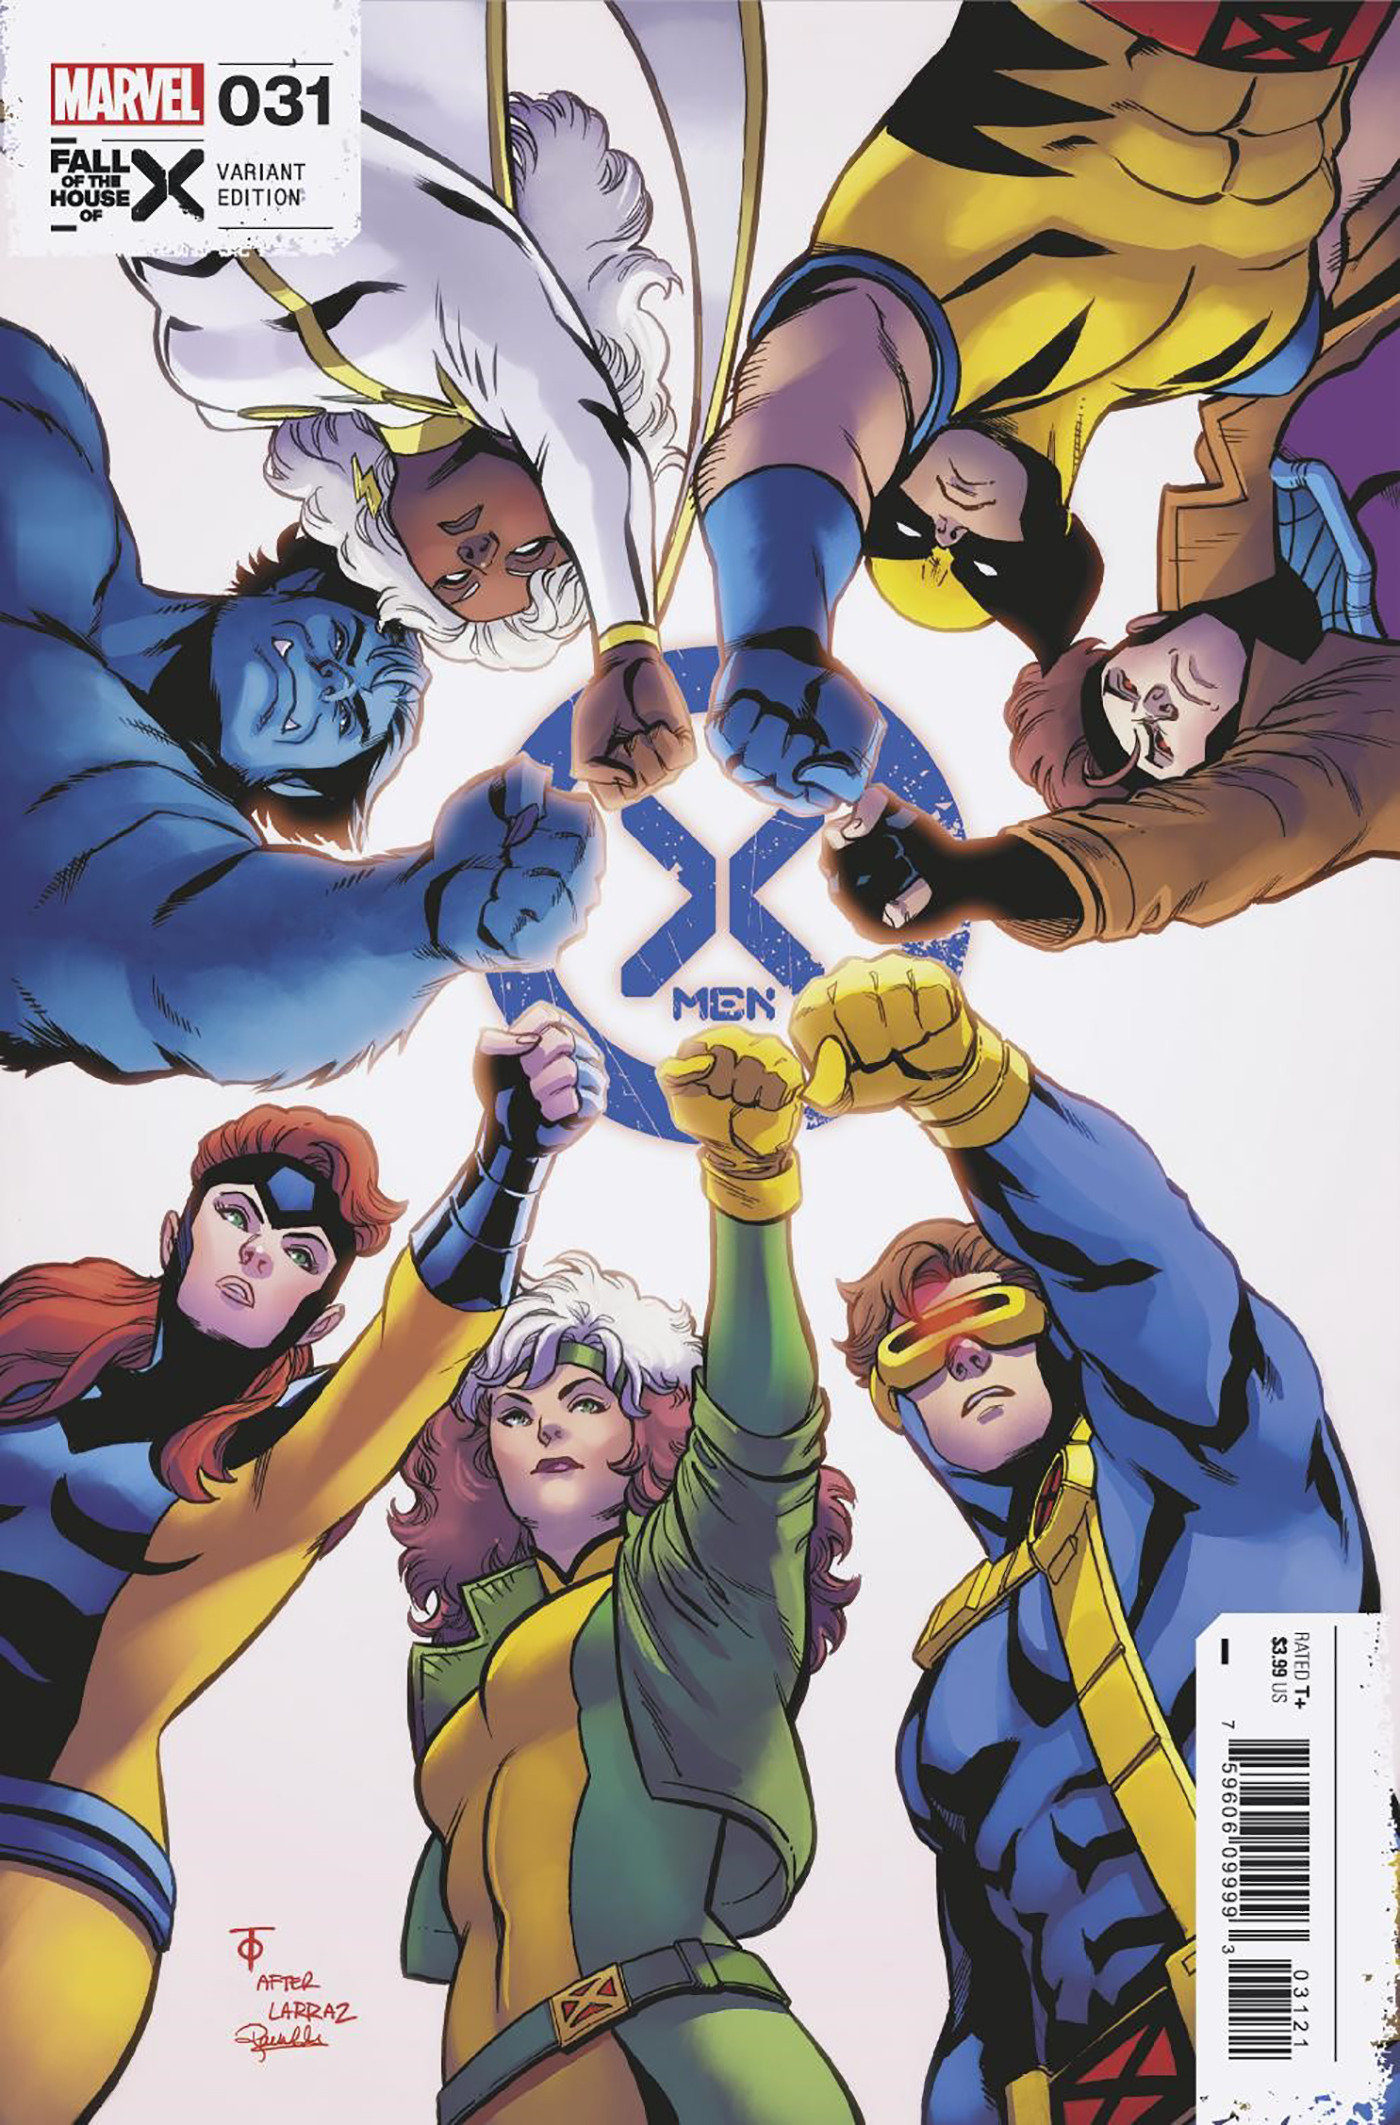 X-Men #31 Marcus To X-Men 97 Homage Variant (Fall of the House of X) (2021)